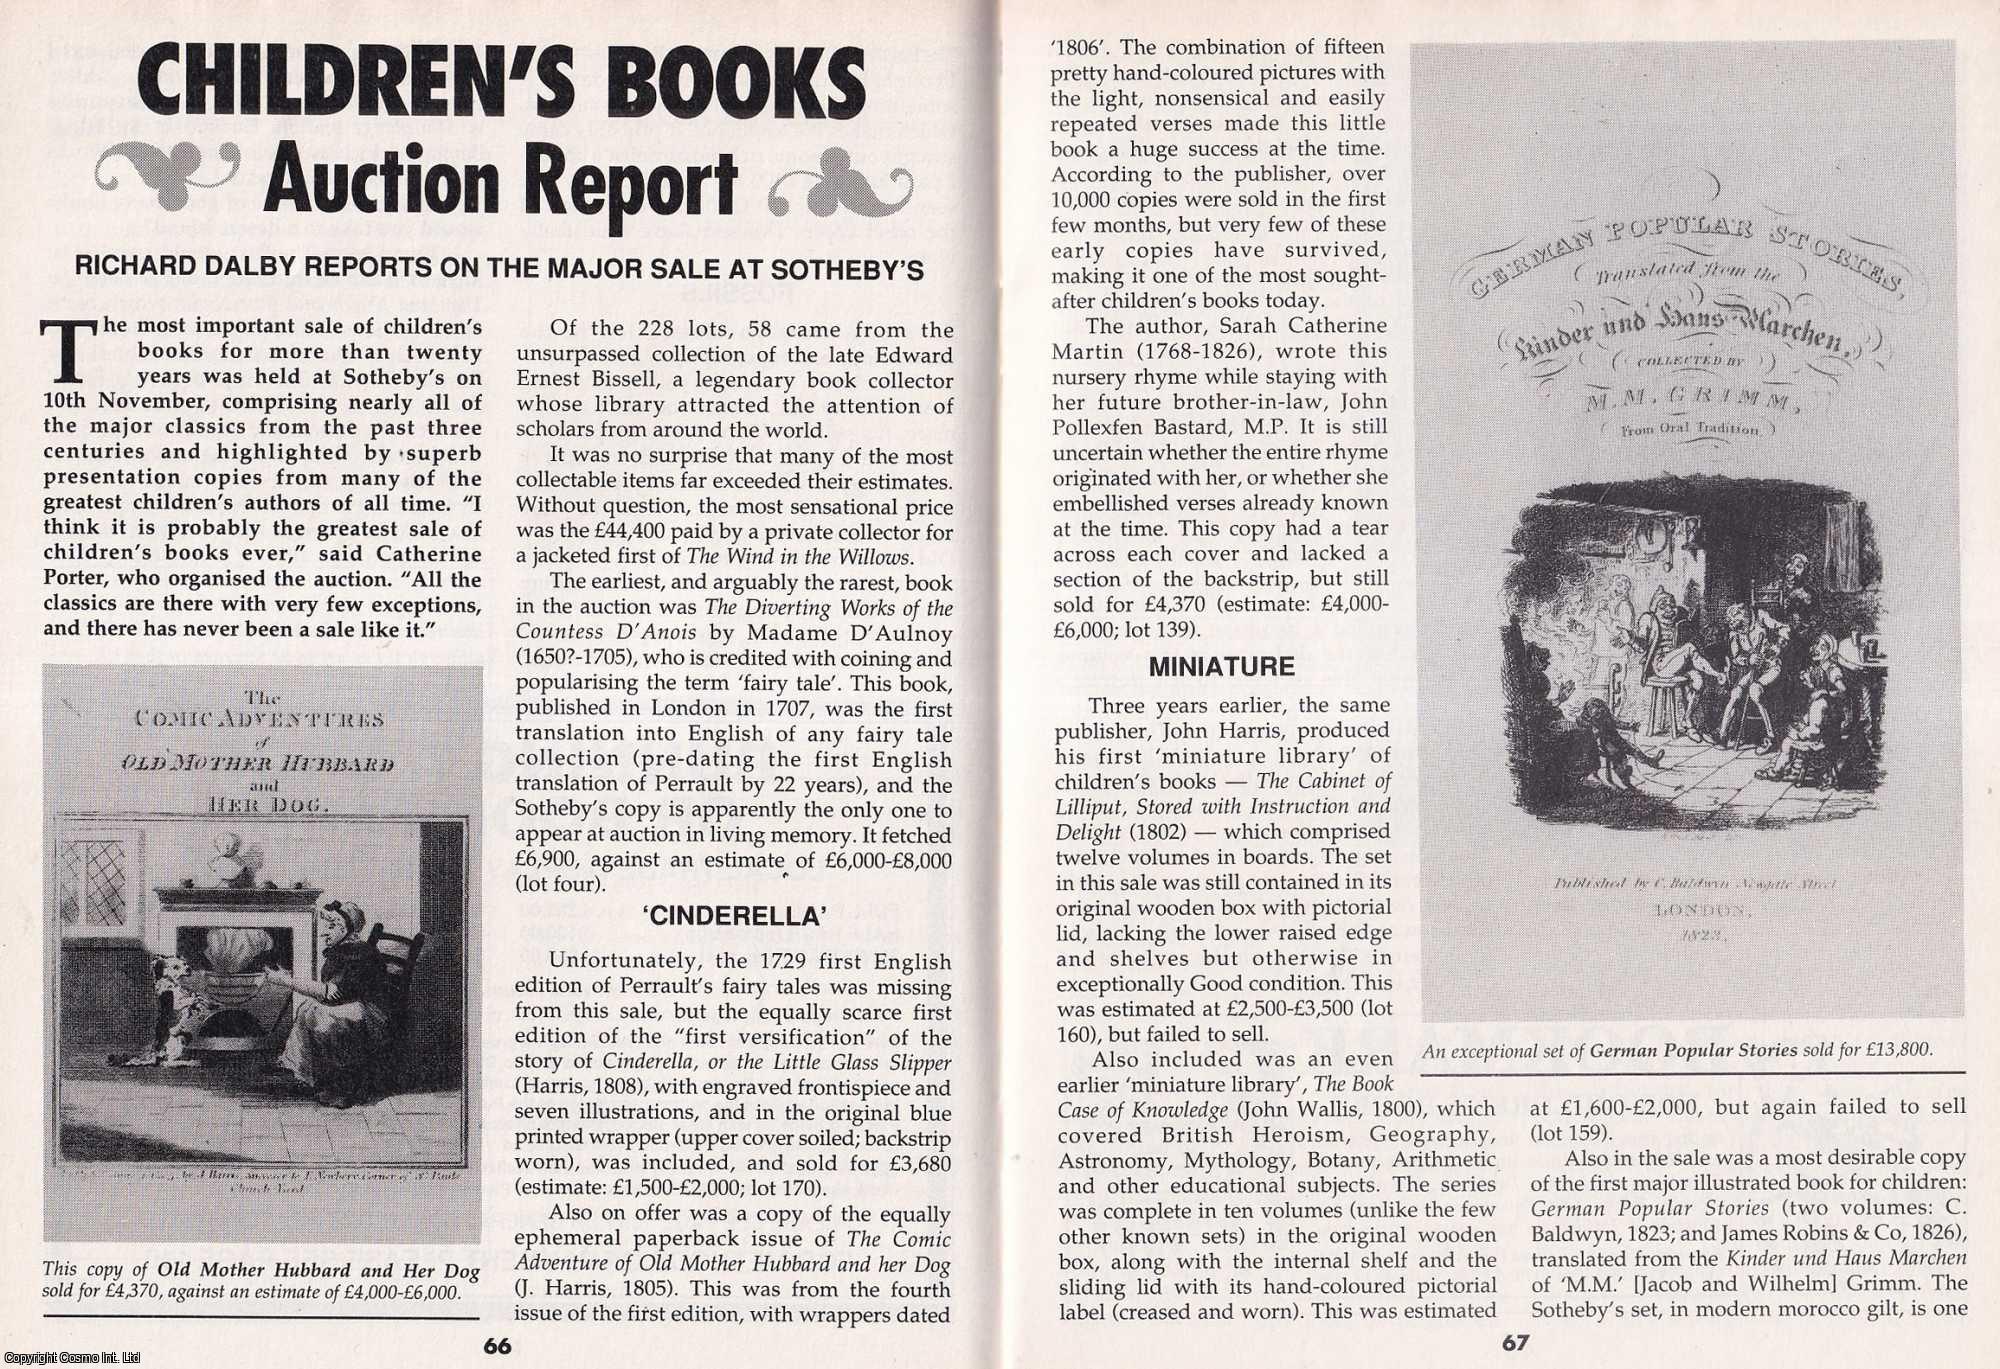 Richard Dalby - Children's Books. Auction Report. Reporting on The Major Sale at Sotheby's. This is an original article separated from an issue of The Book & Magazine Collector publication.